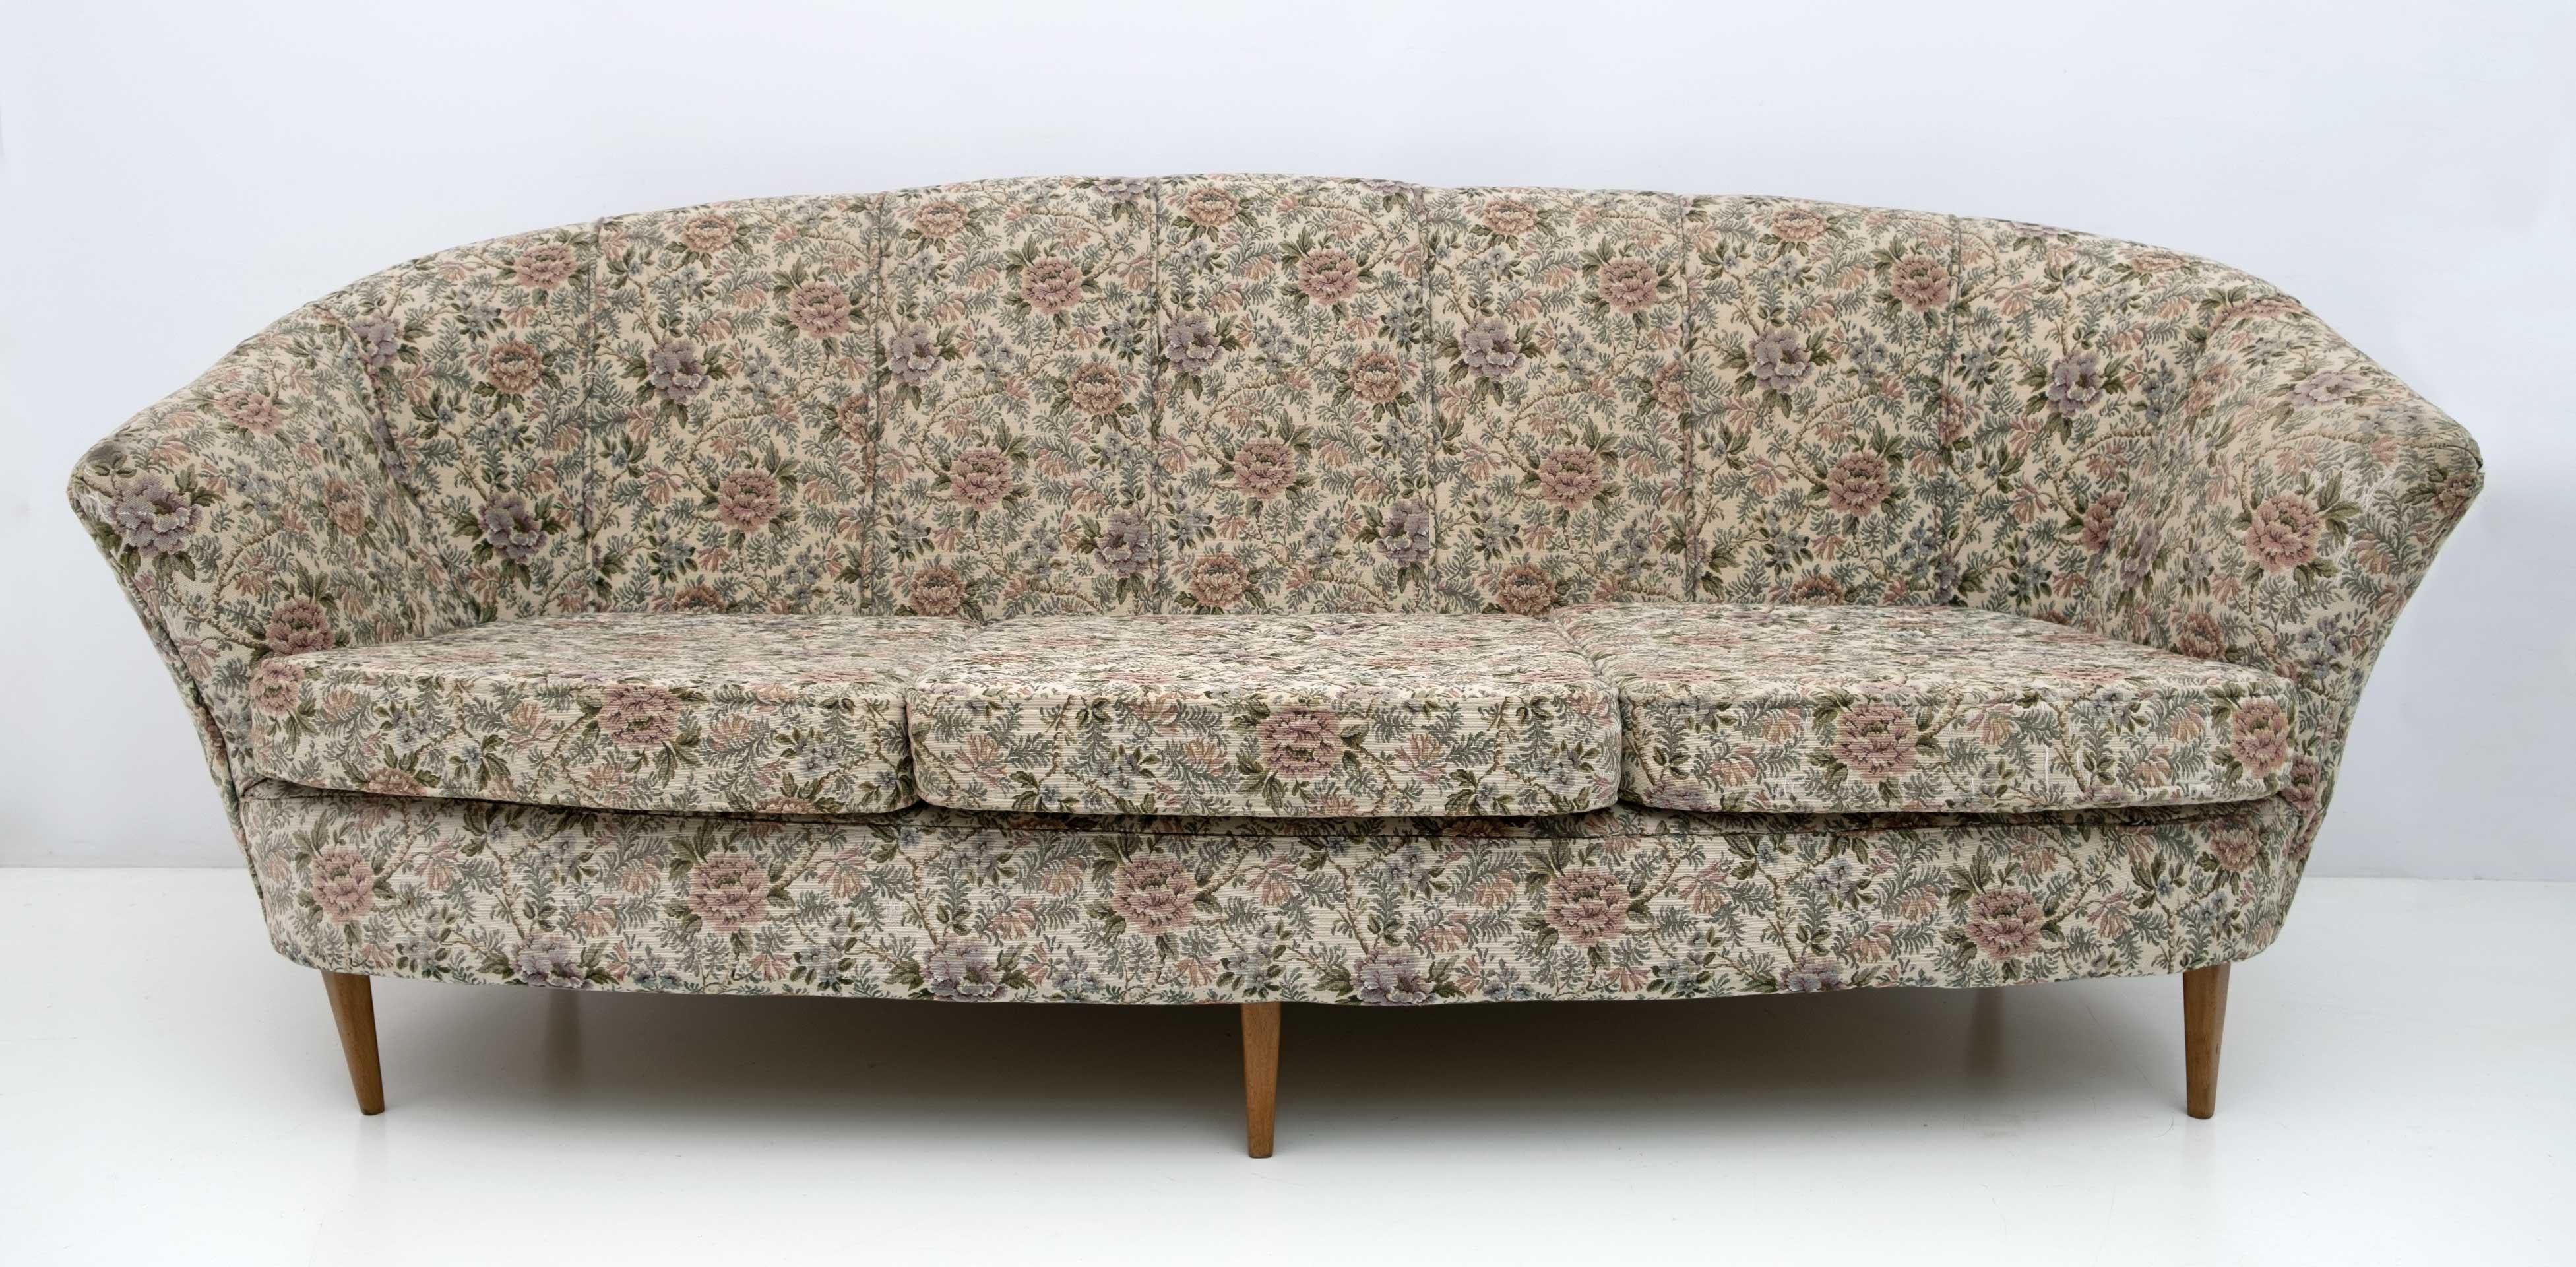 Three seater sofa in the style of Ico Parisi.
Very elegant and comfortable, with floral fabric upholstery, the upholstery was redone twenty years ago but new upholstery is recommended.